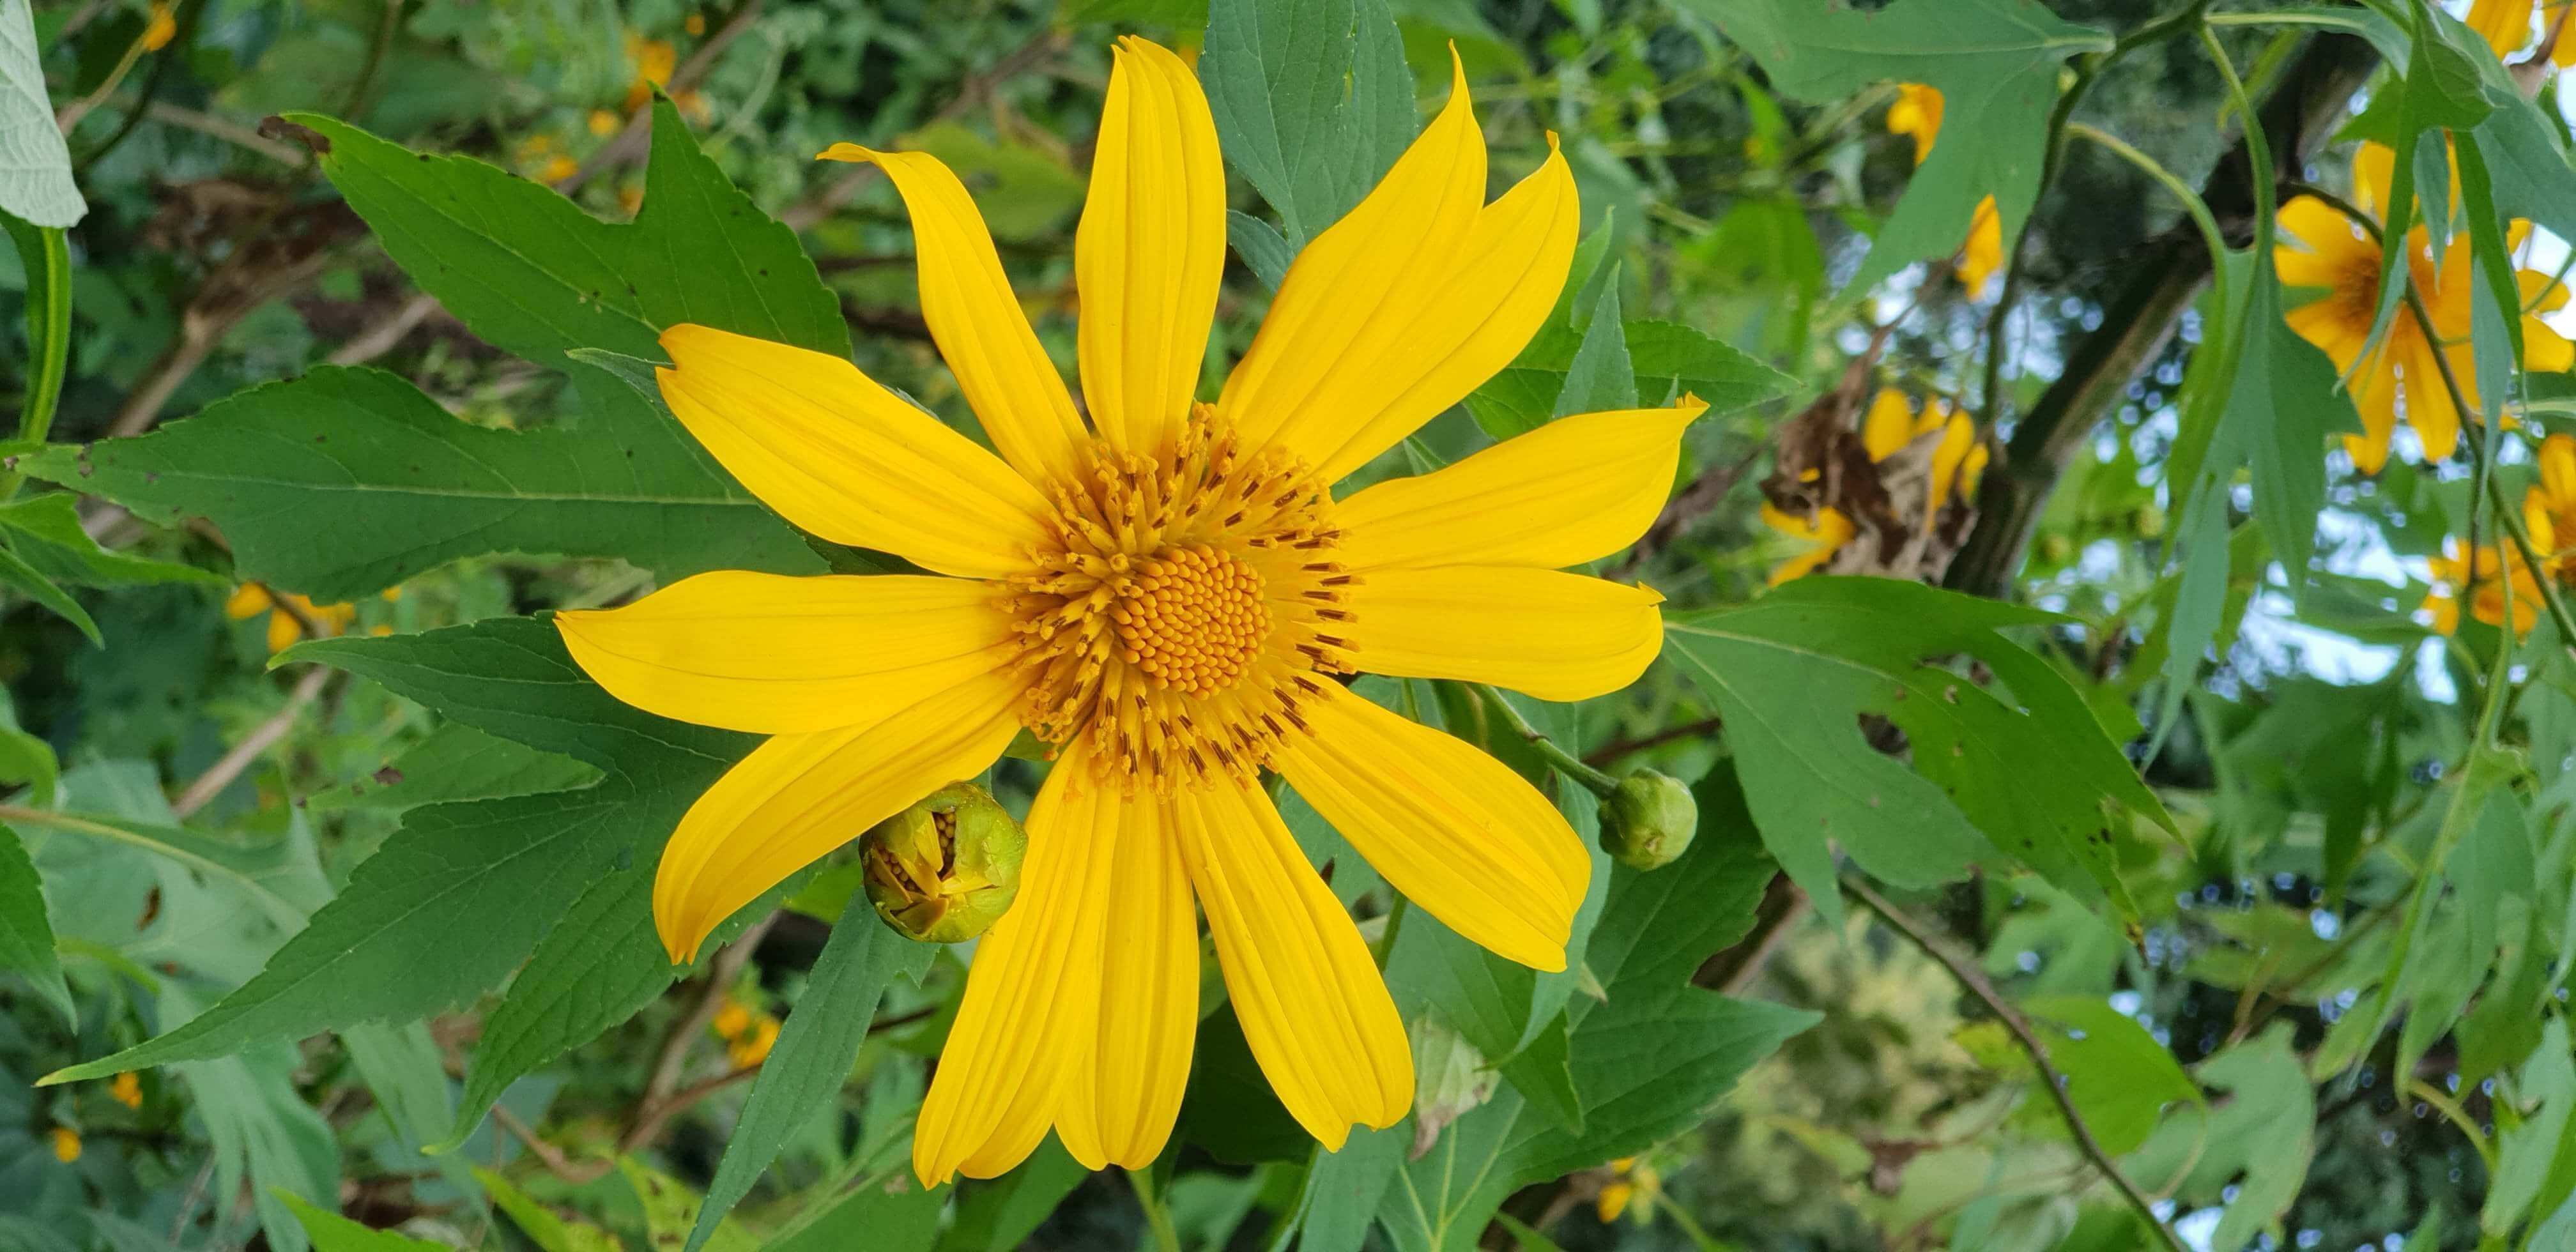 Nuttall's sunflower - Helianthus nuttallii spotted in Mae Klang Luang village